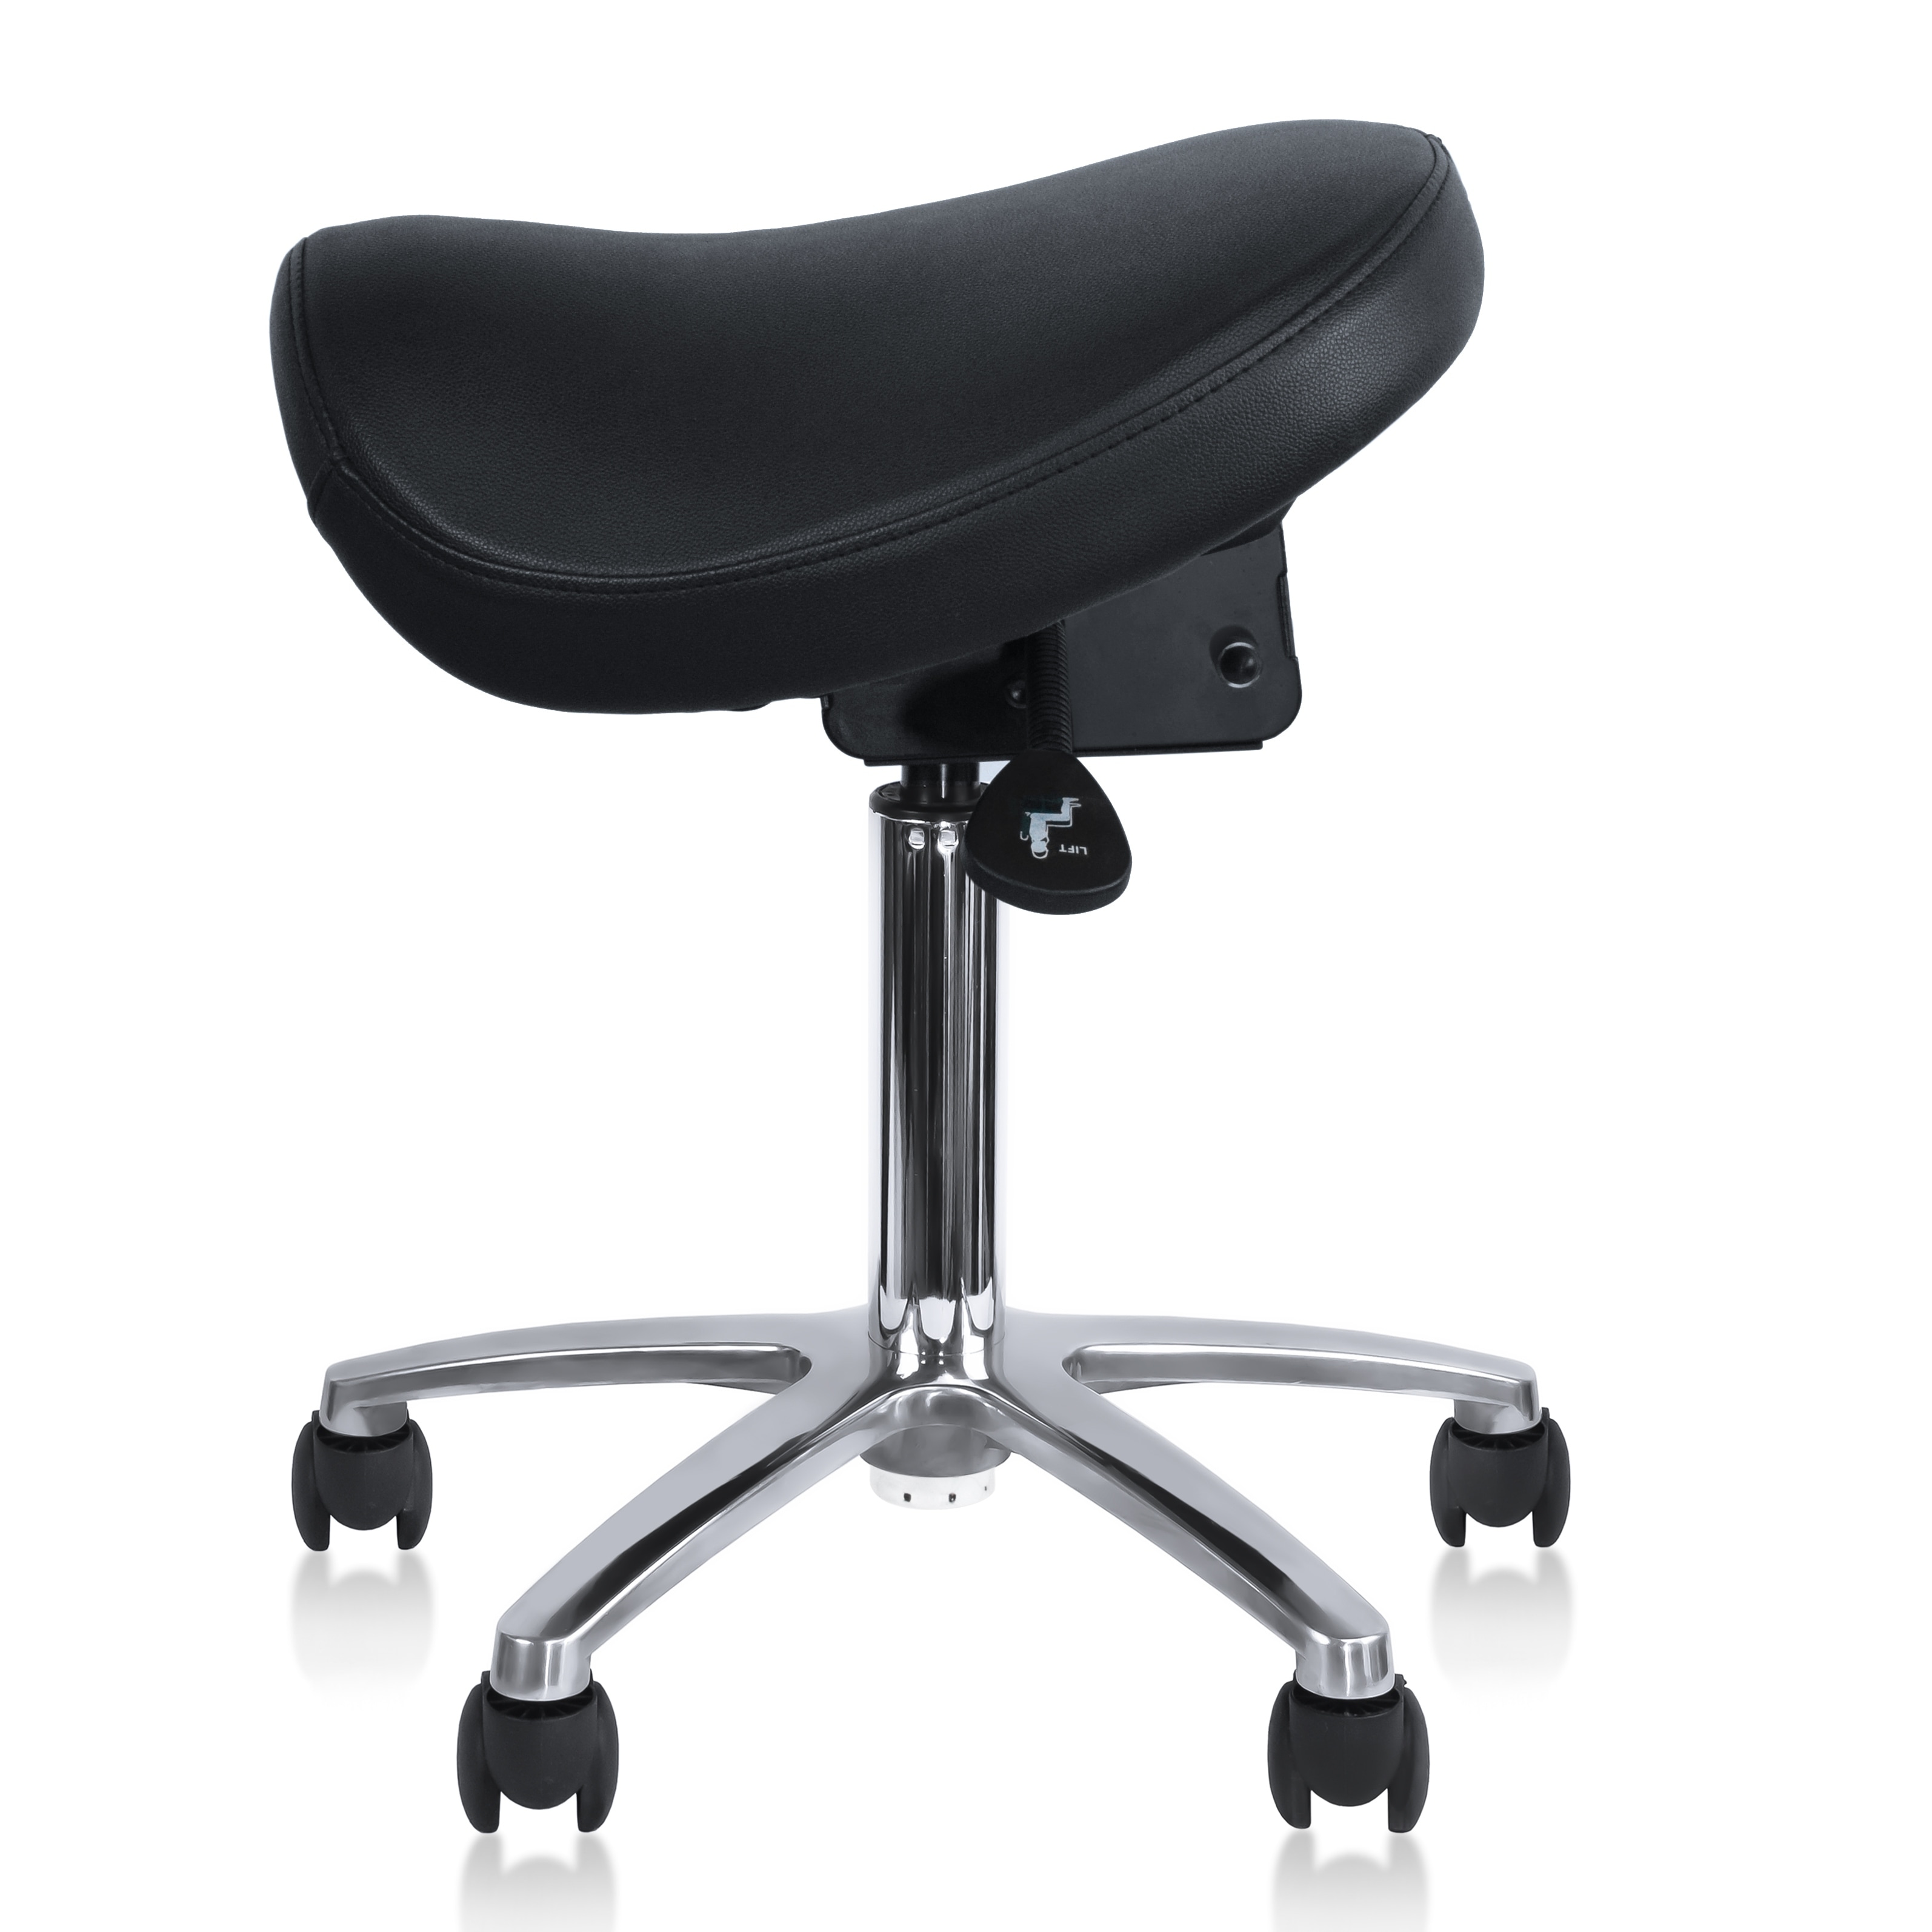 Global-Dental Standard Mobile Chair Saddle Chair Swivel Chair Doctors Stool PU Leather #80012